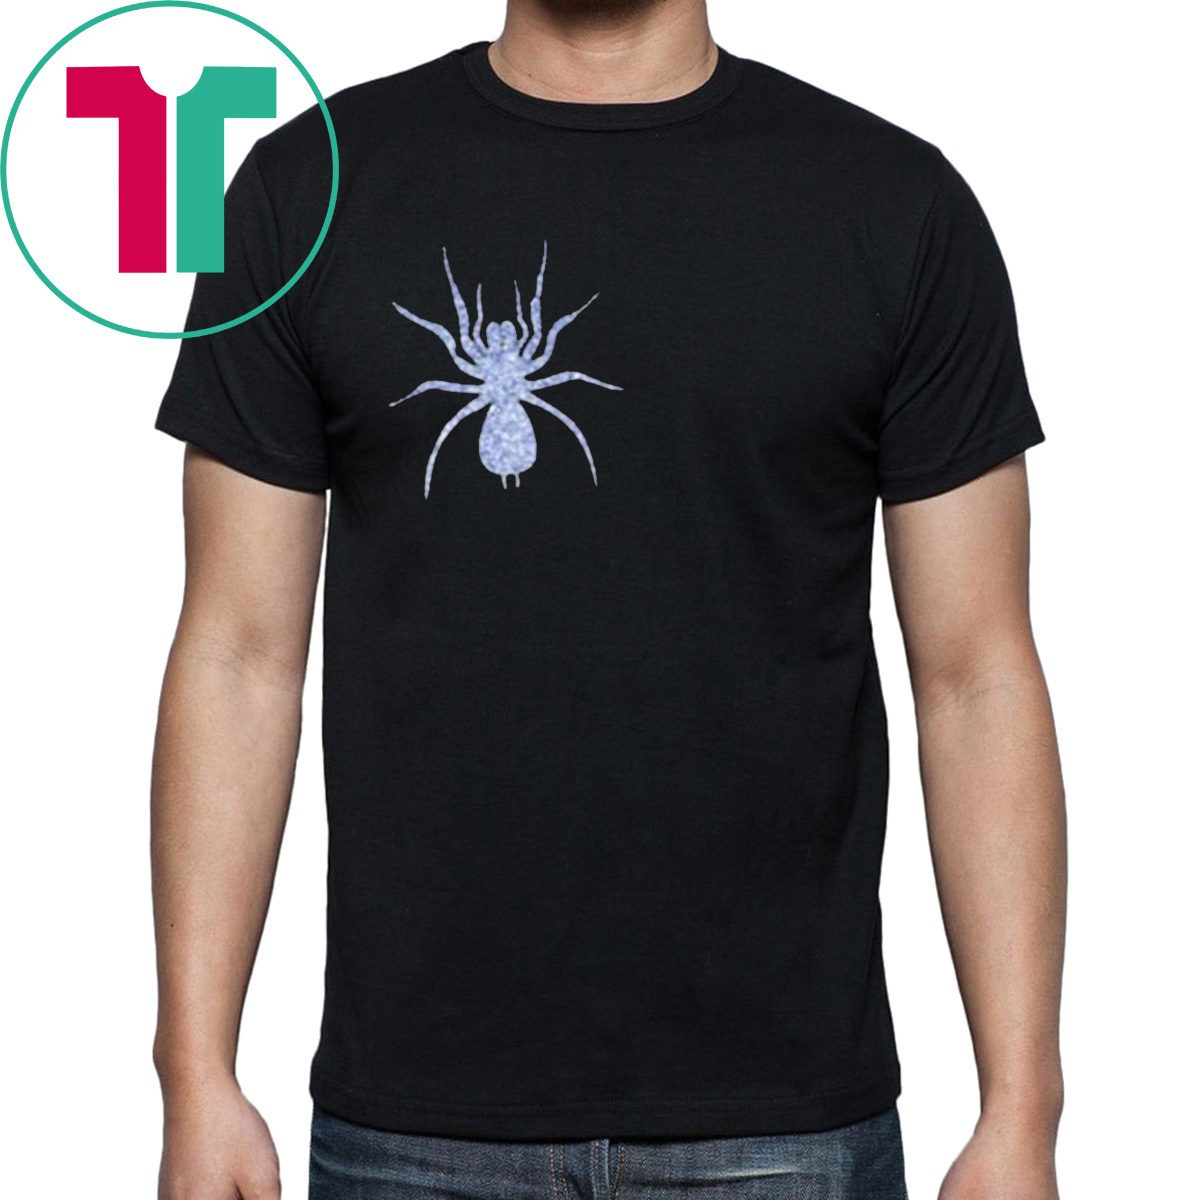 Details about Lady Hale Spider Brooch T Shirt - ShirtElephant Office